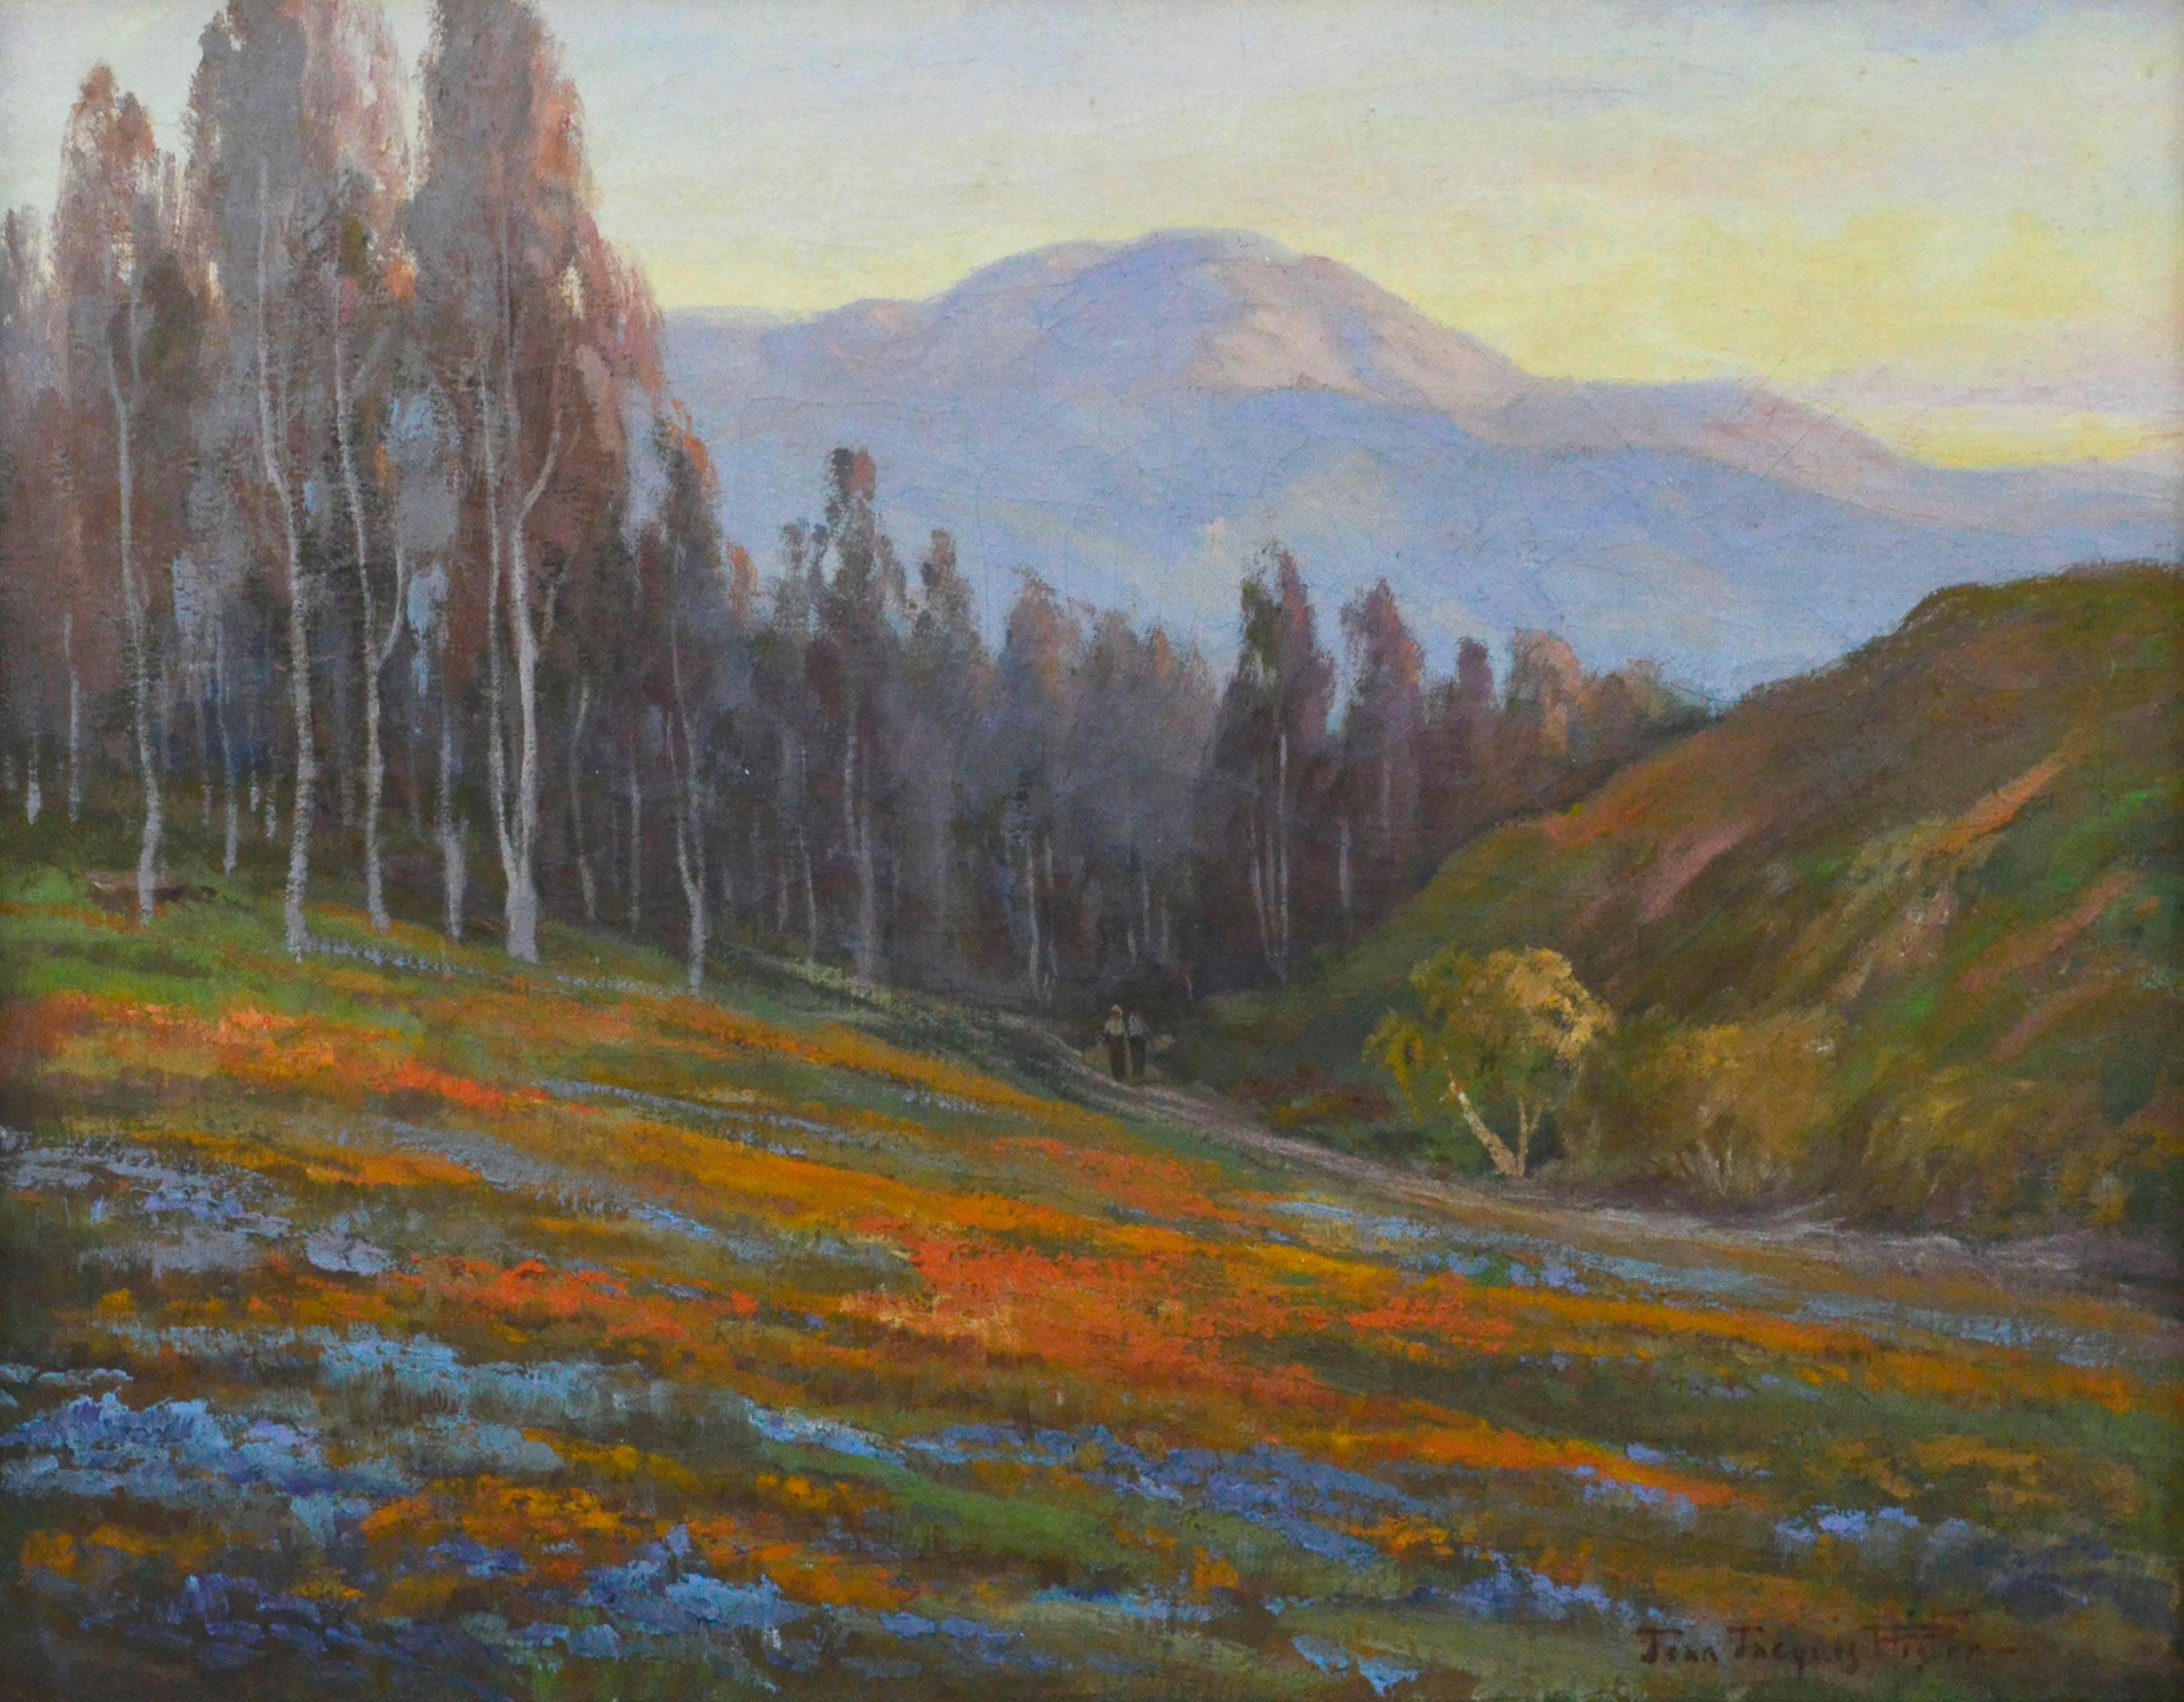 Wonderful early 20th Century California impressionist painting, looking towards Mount Tamalpais from Lake Bon Tempe, with a couple strolling through poppies and Lupine by Jean Jacques Pfister (Swiss/American, 1878-1949), circa 1910. Signed lower